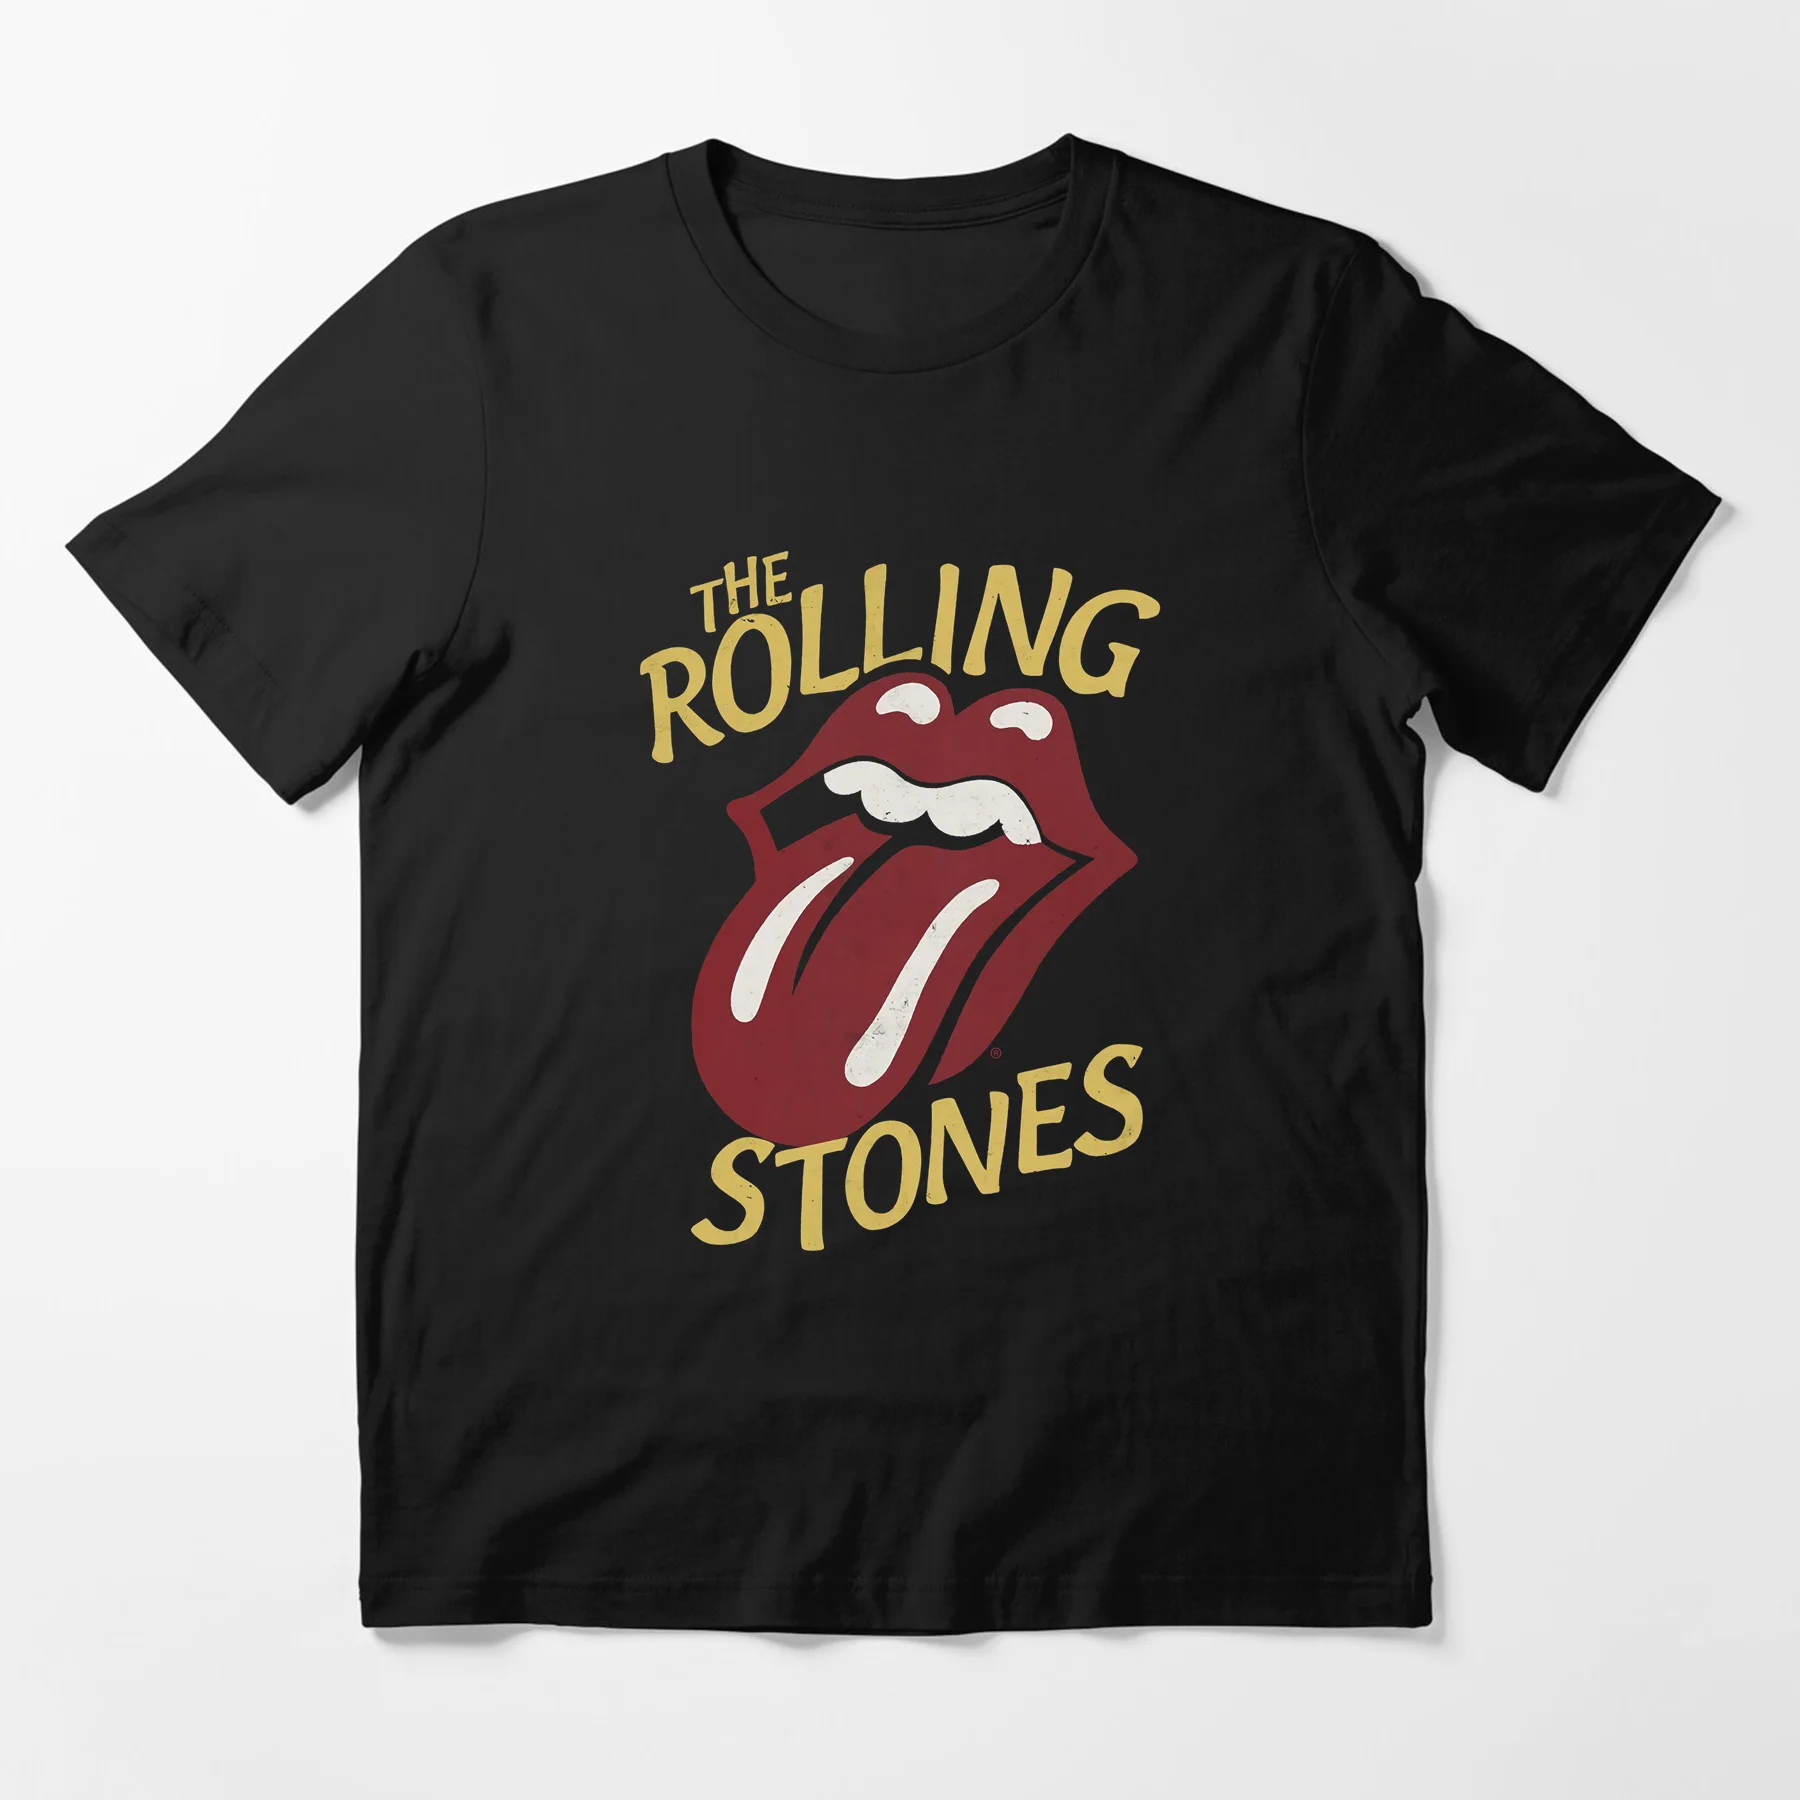 

Amazing Tees Male T Shirt Casual Oversized Vintage Type Tongue The Rolling Stones Essential T-shirt Men T-shirts Graphic S-3XL